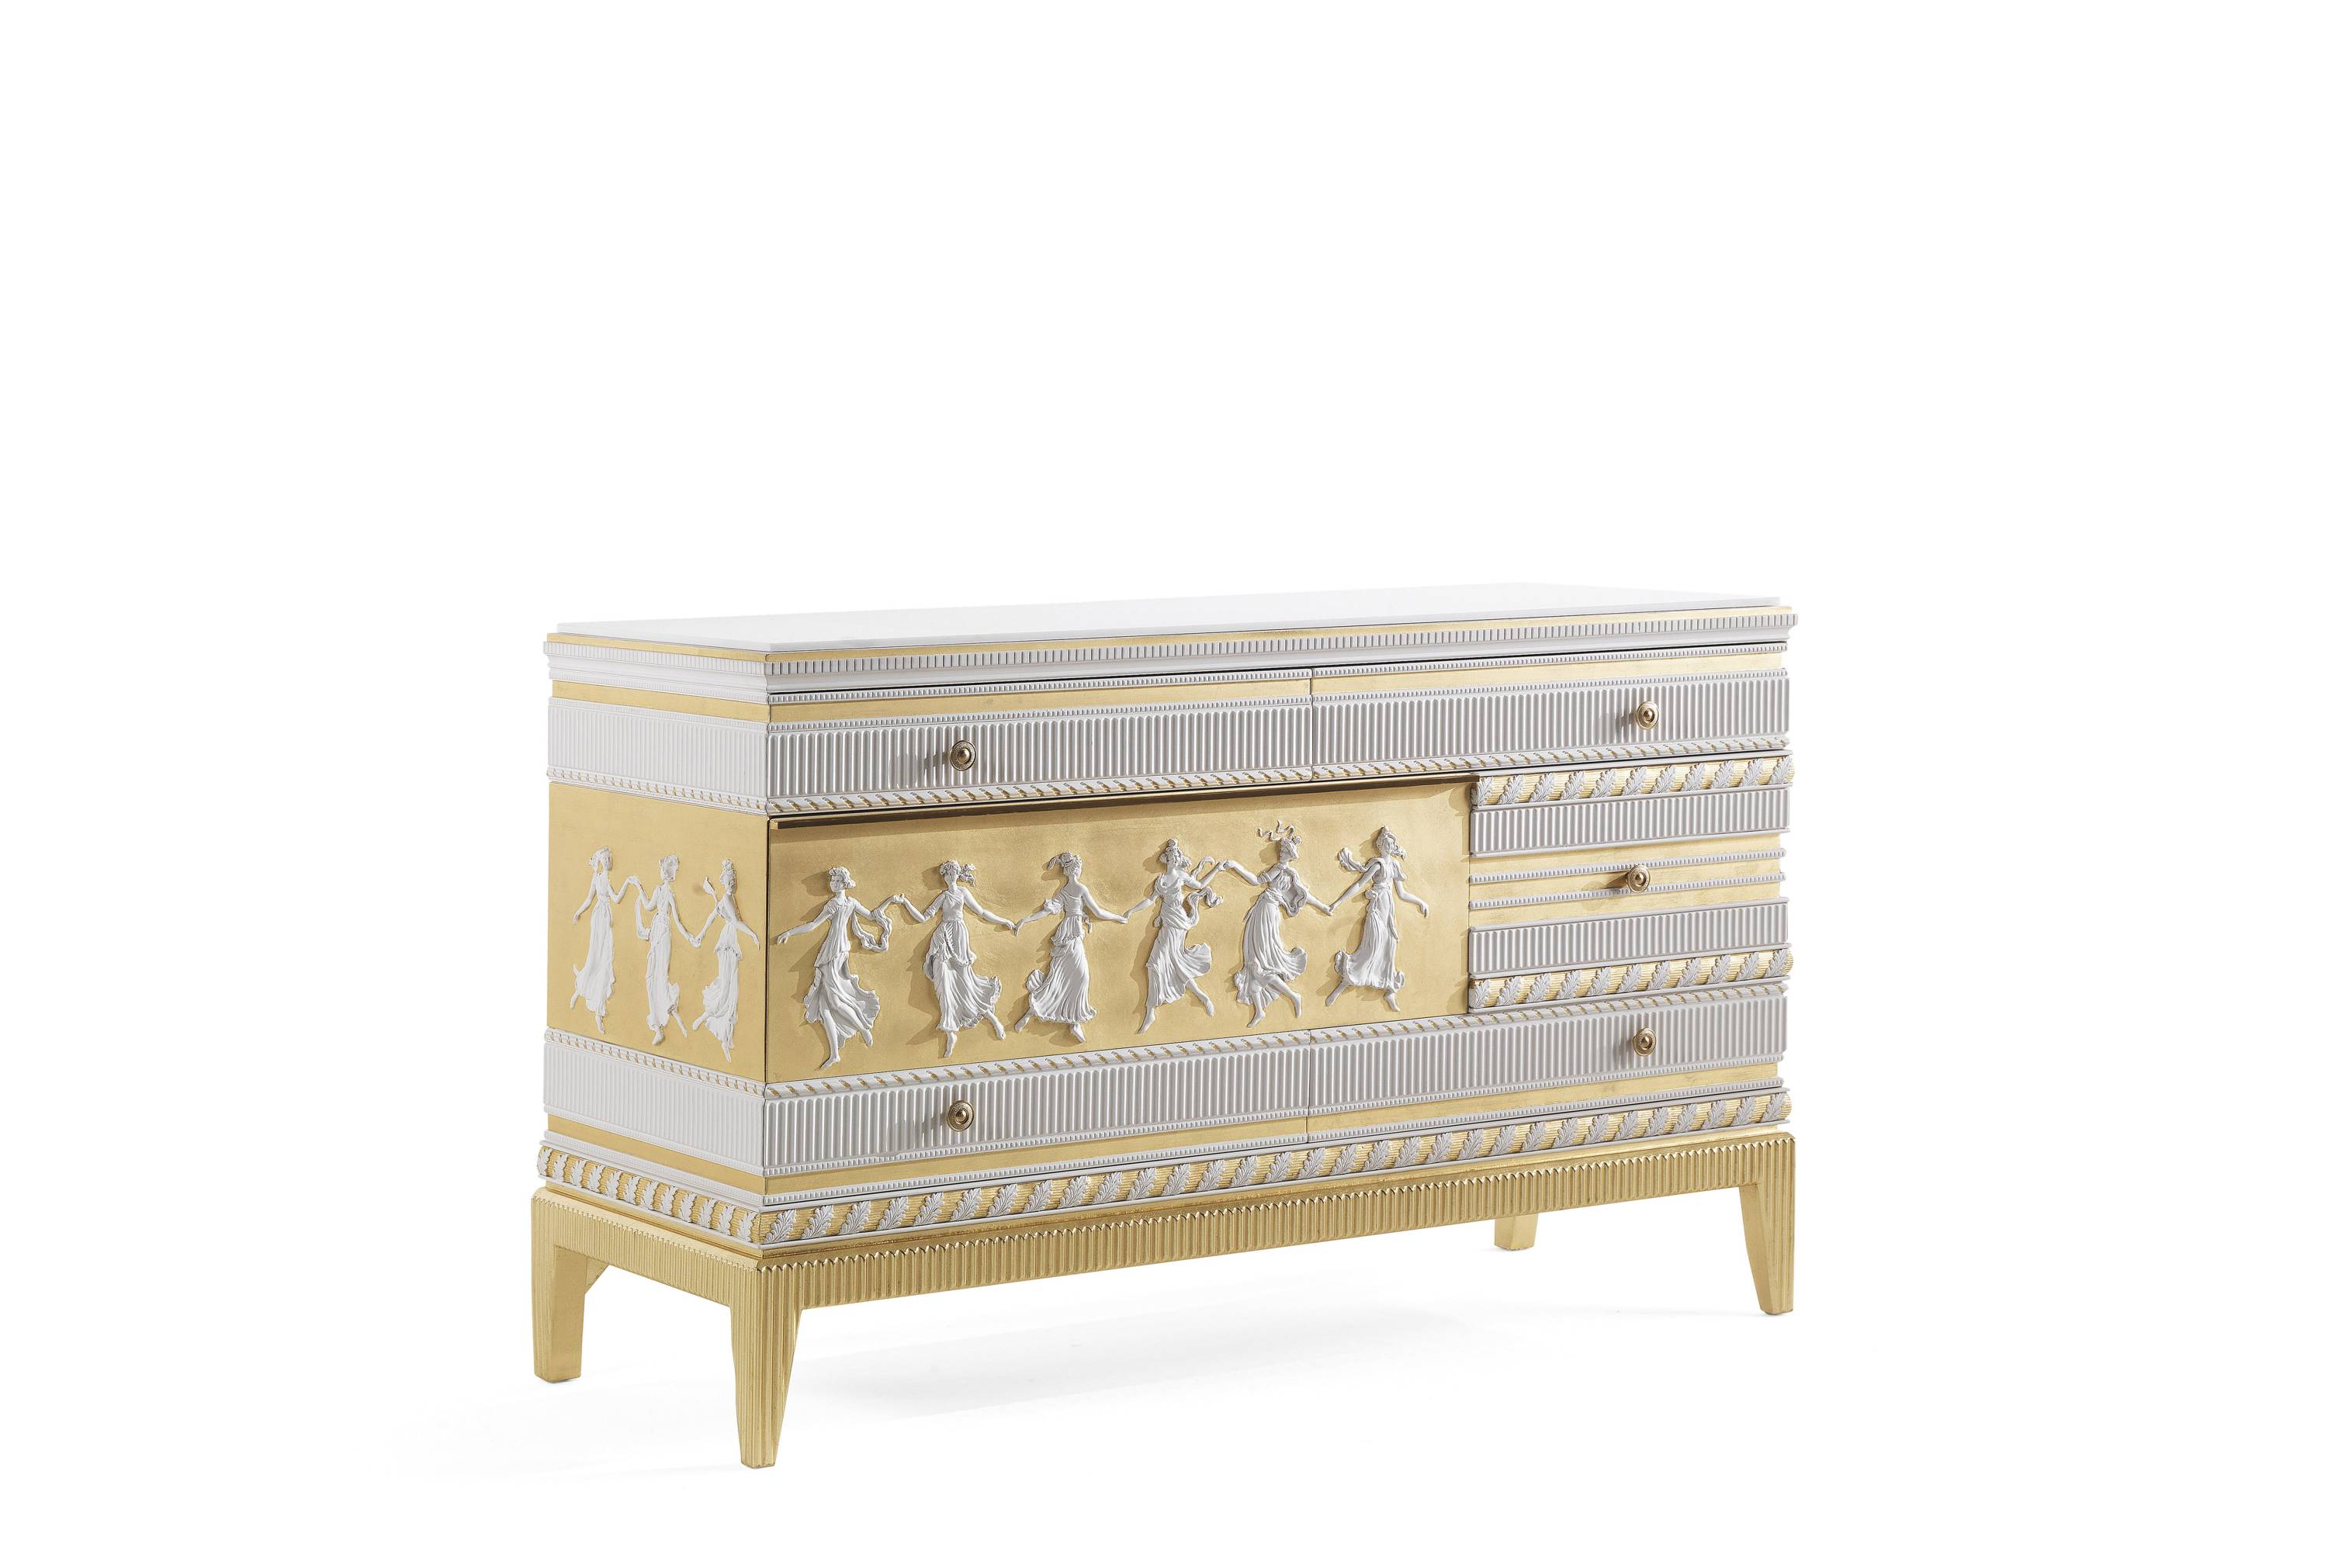 PORTLAND drawer unit - convey elegance to each space with Italian classic night storage units of the classic Oro Bianco collection